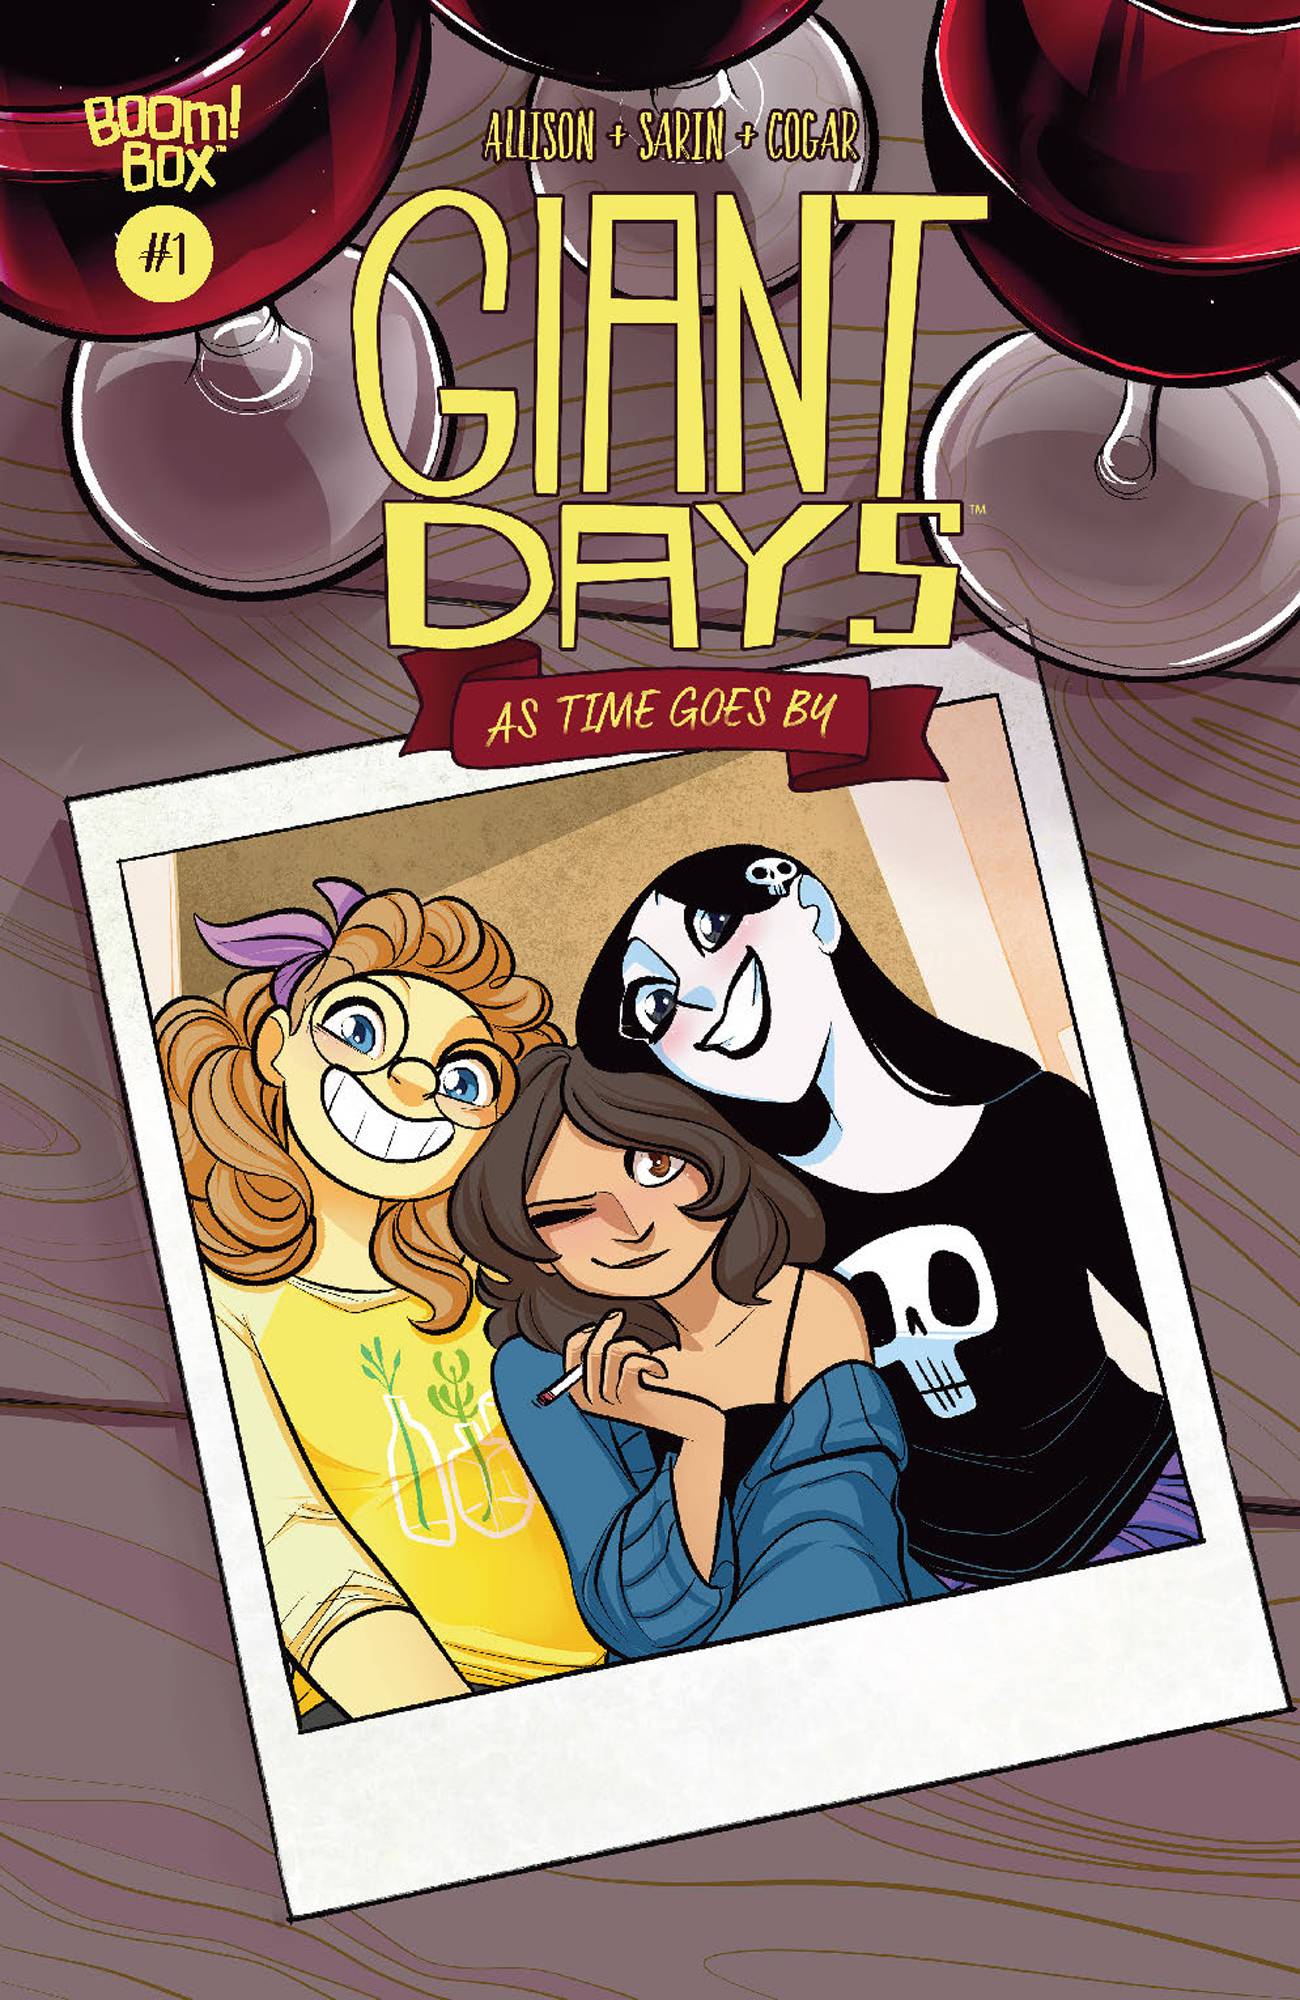 Giant Days: As Time Goes By #1 (2019)